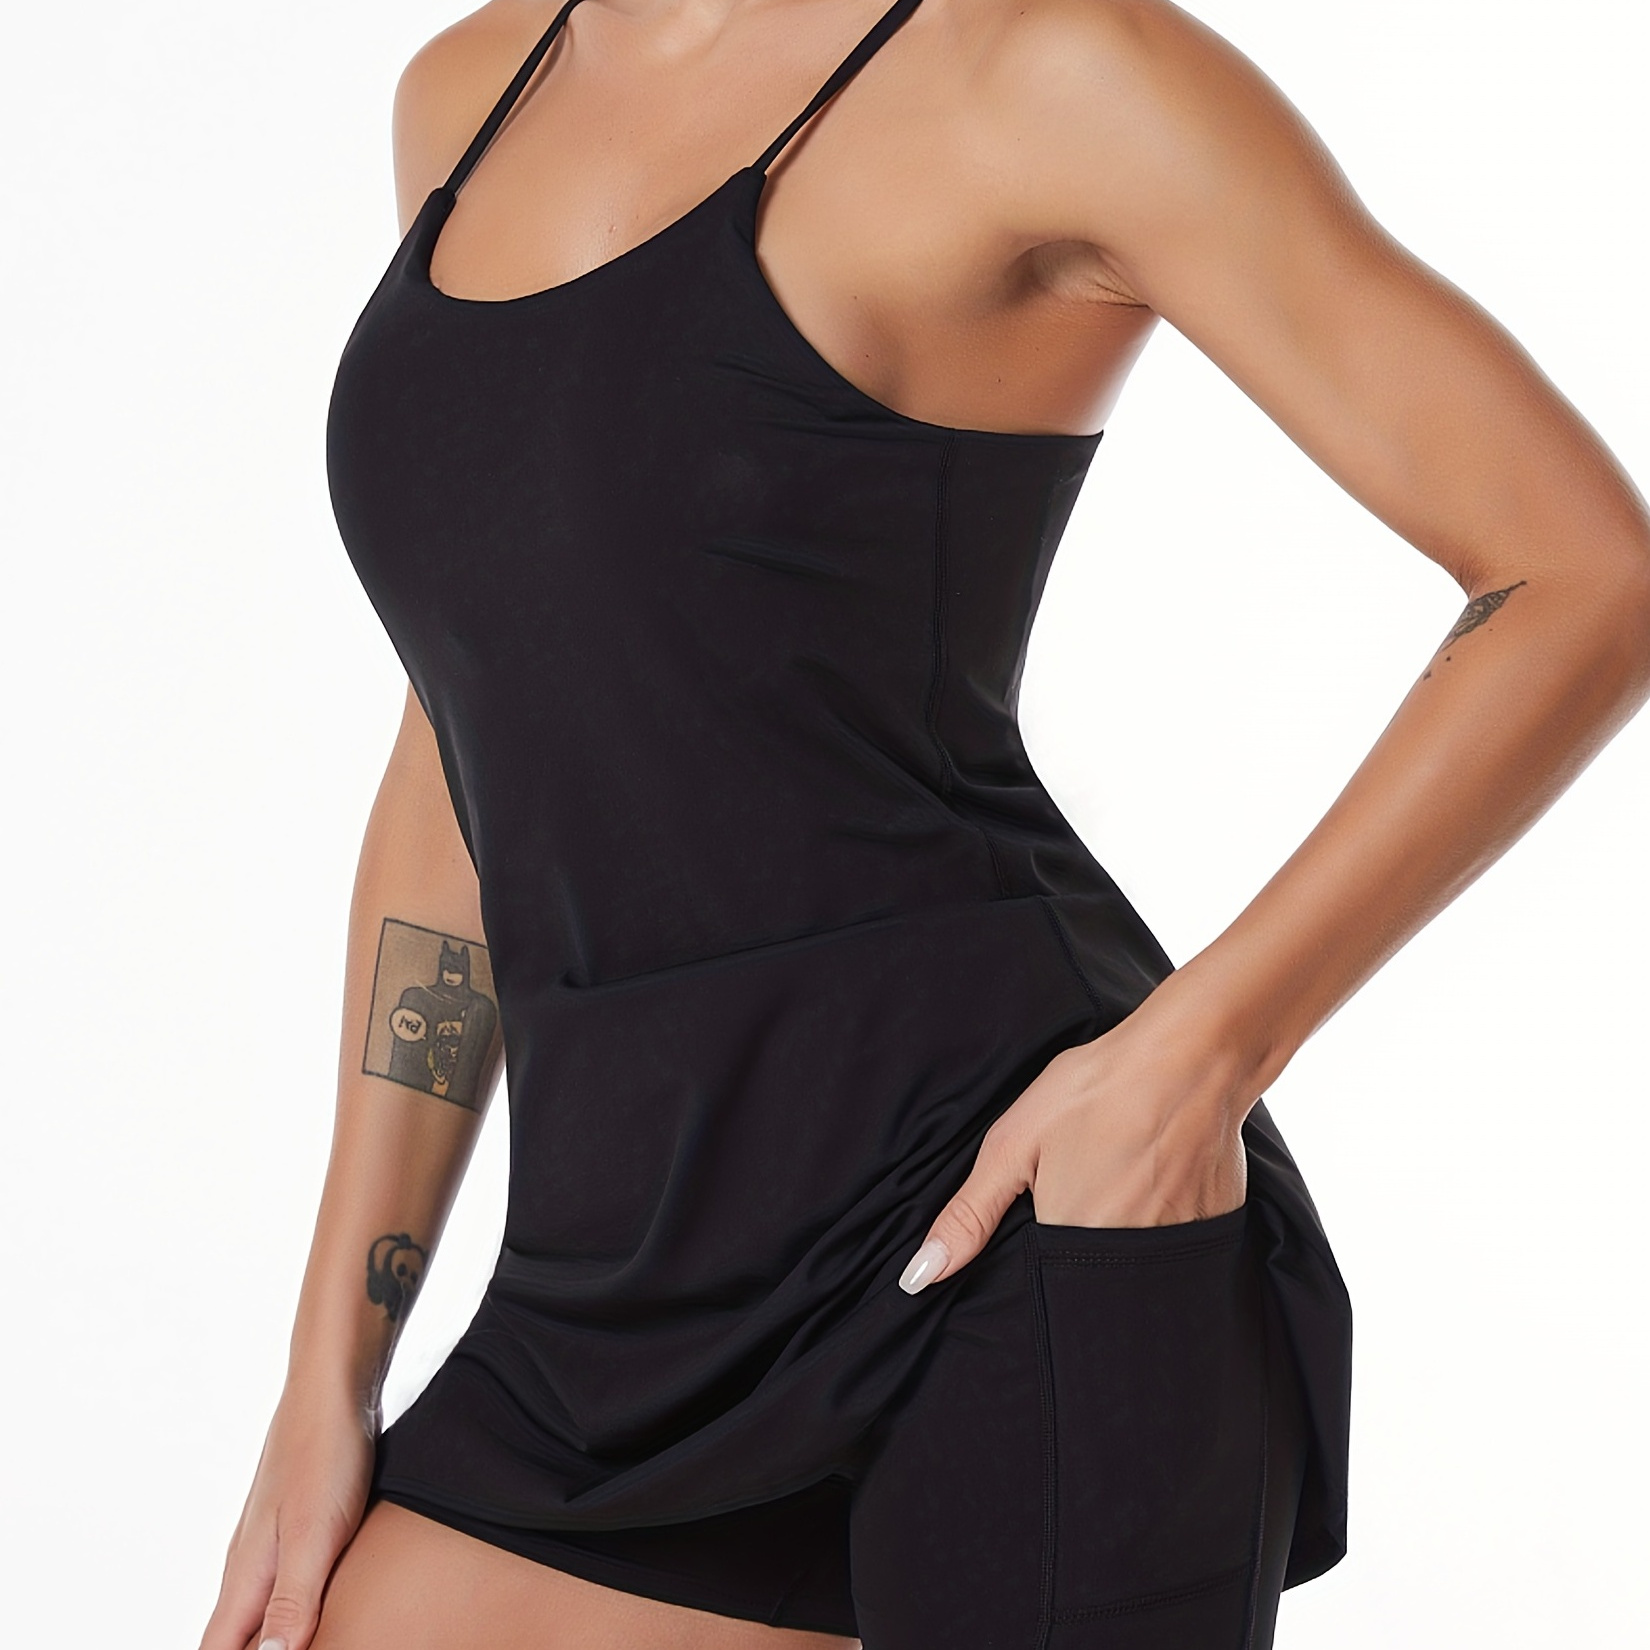 Tennis Dresses Women's Camisole Dress Built-in Bra And Shorts